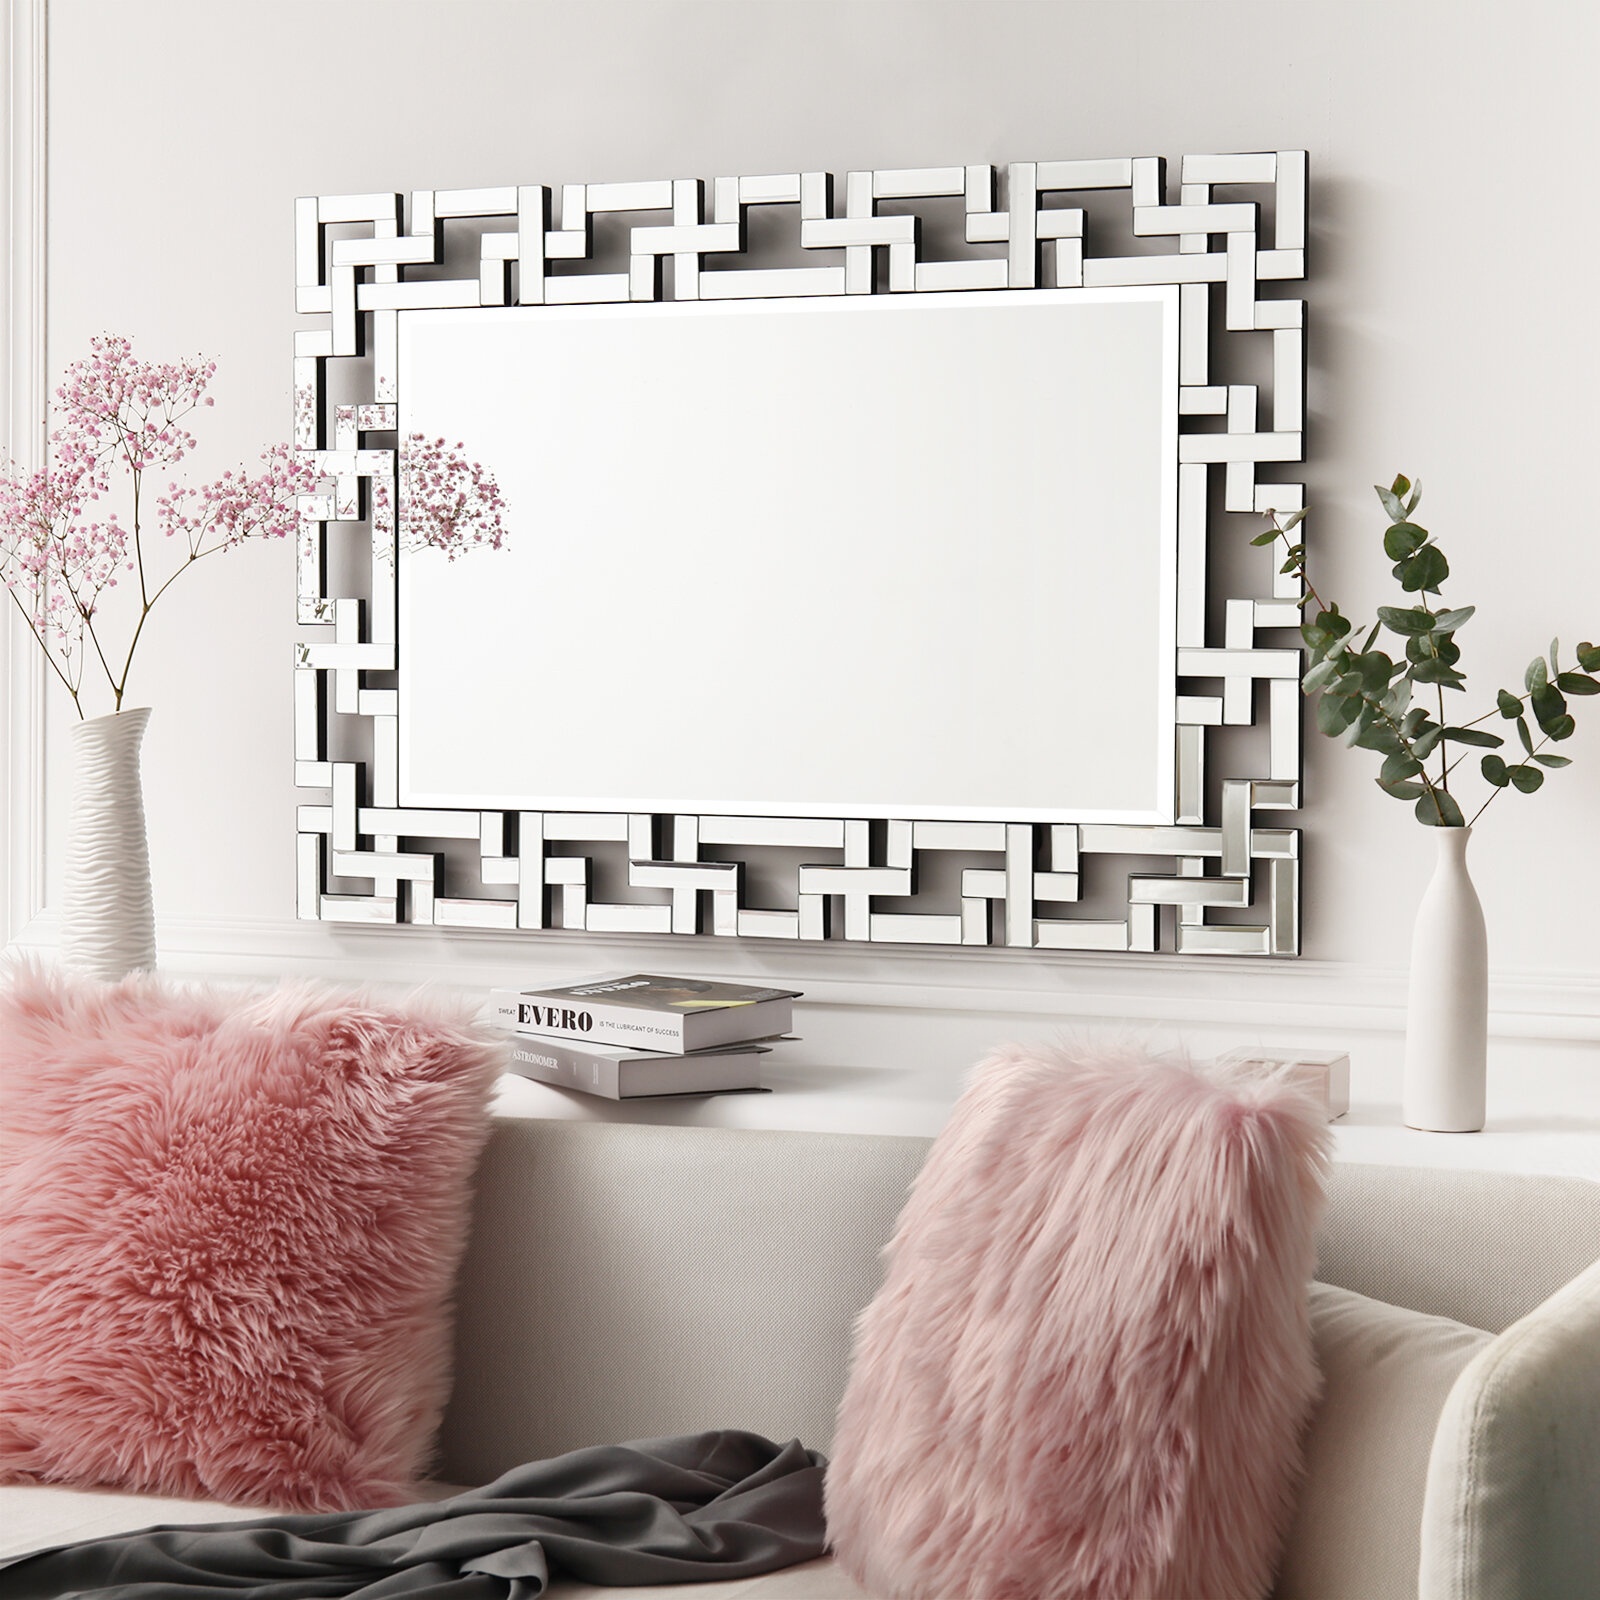 Living Room Wall Ideas With Mirrors | Cabinets Matttroy